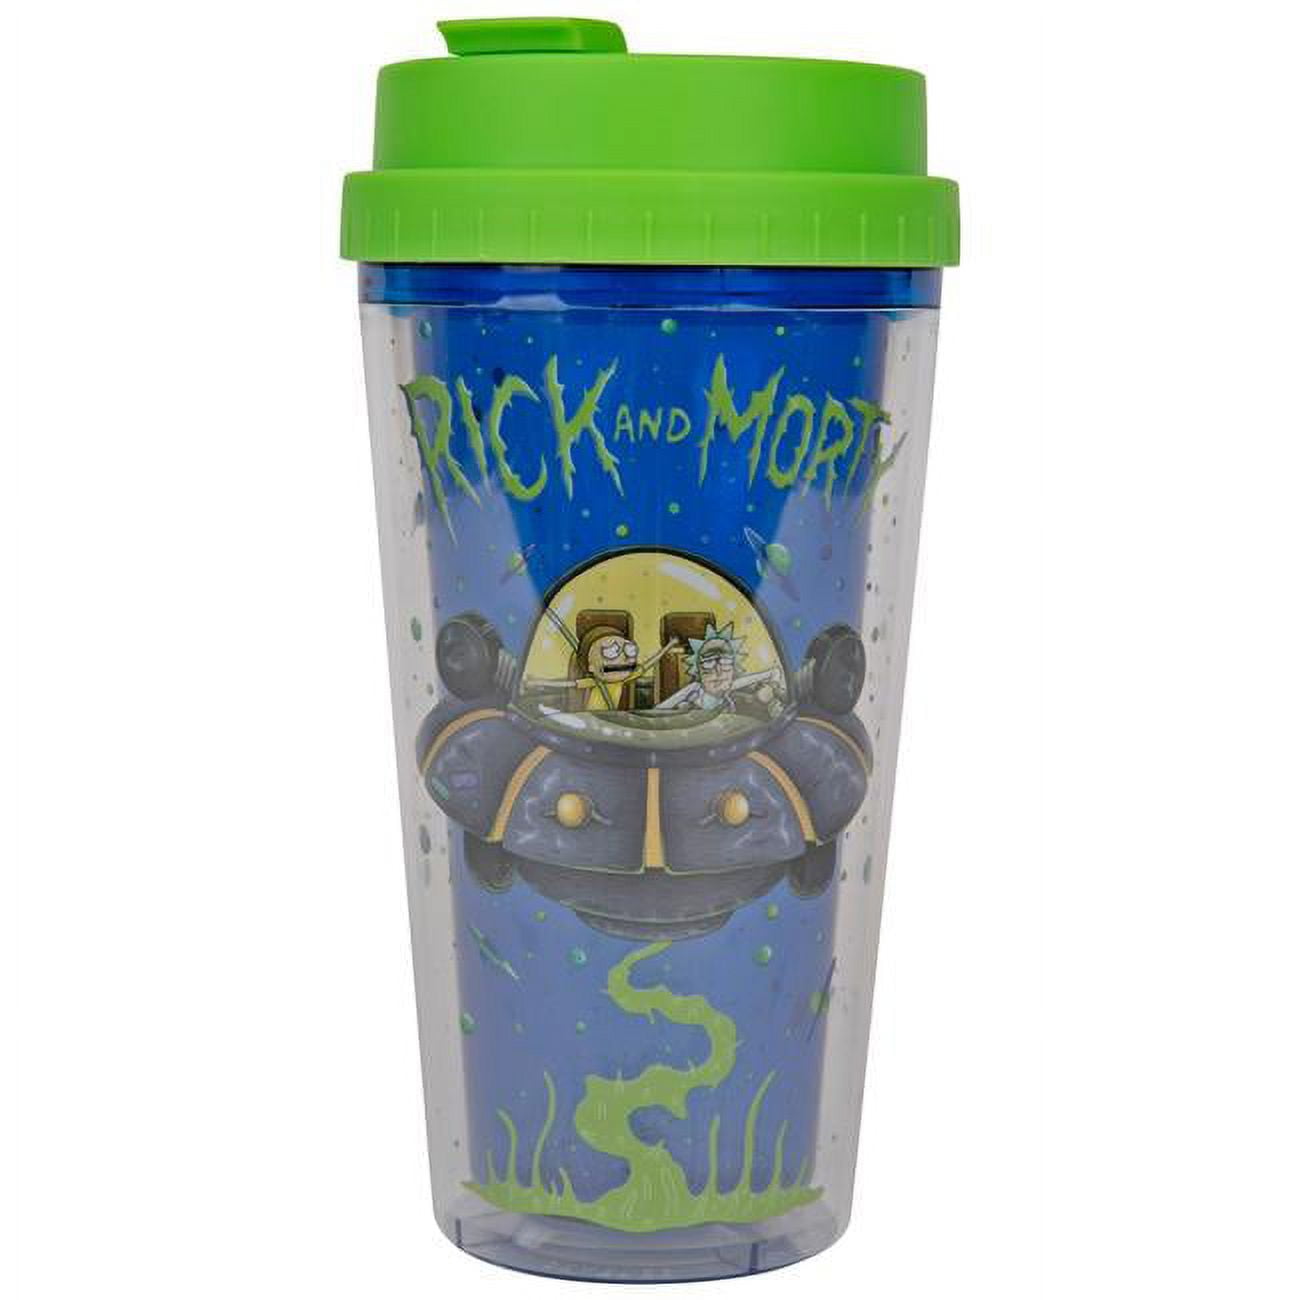 Rick and Morty Portal Carnival Plastic 20 oz. Travel Cup with Straw Black